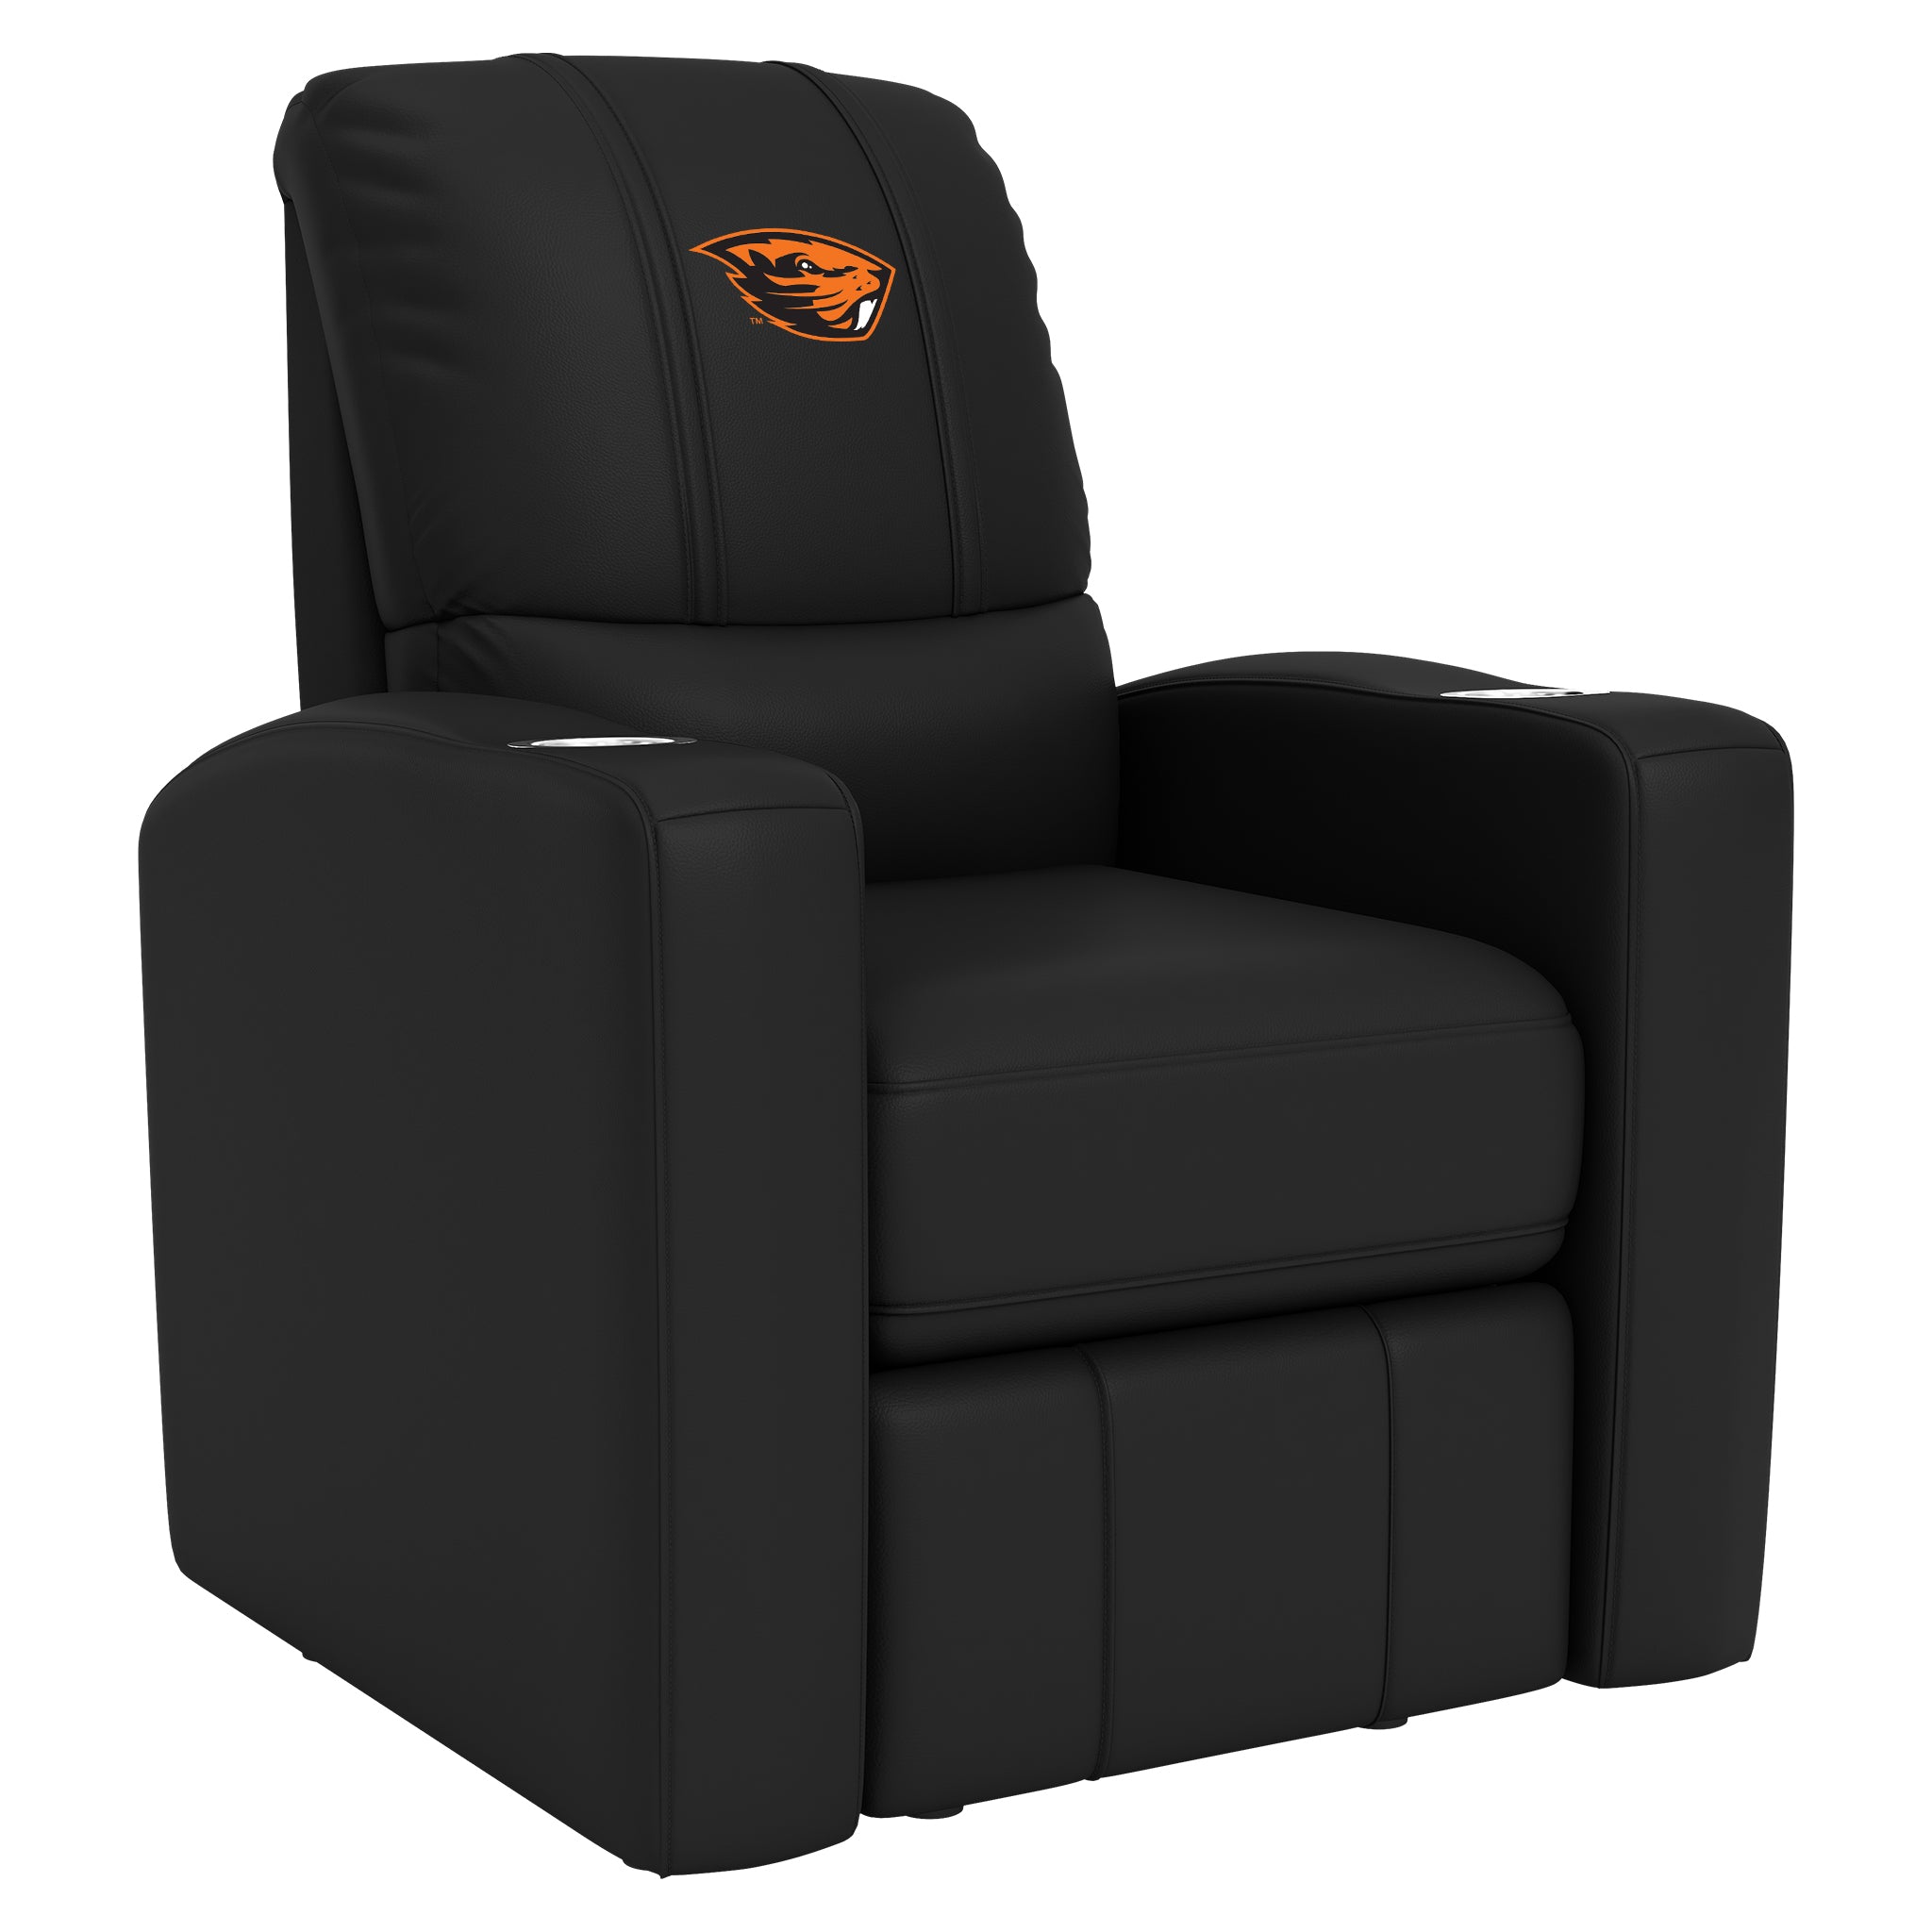 Oregon State Beavers Stealth Recliner with Oregon State University Beavers Logo